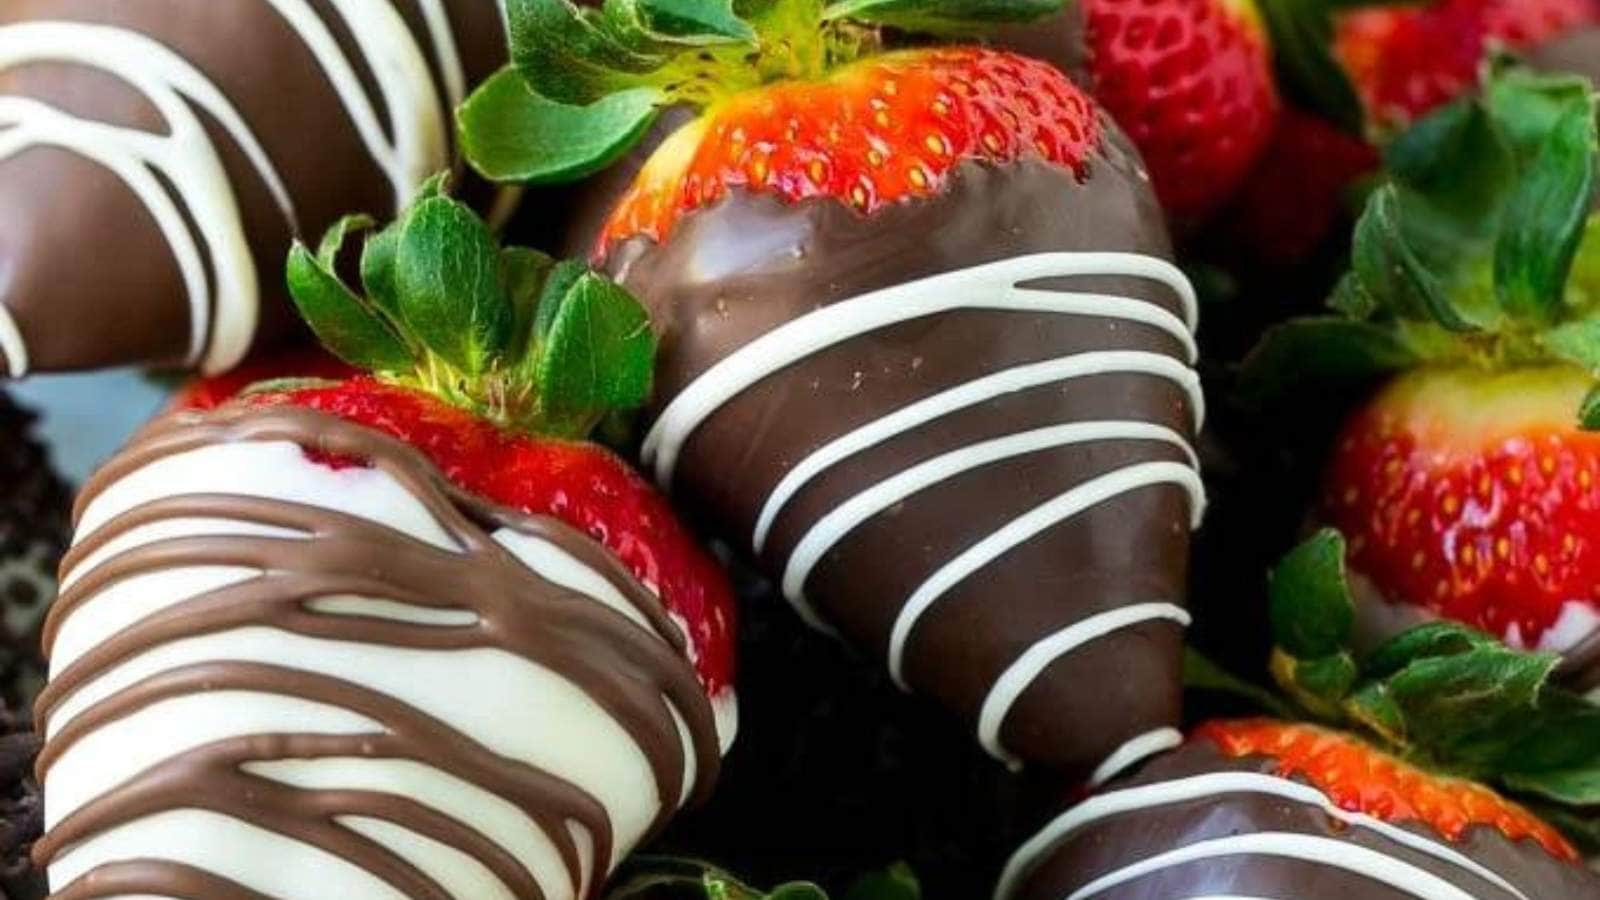 <p>These chocolate-covered strawberries are fresh, ripe berries dipped in melted chocolate and rolled in various toppings. An easy and elegant dessert or snack option!</p><p><strong>Get the Recipe: <a href="https://www.dinneratthezoo.com/chocolate-covered-strawberries/" rel="noreferrer noopener">Chocolate Covered Strawberries</a></strong></p>